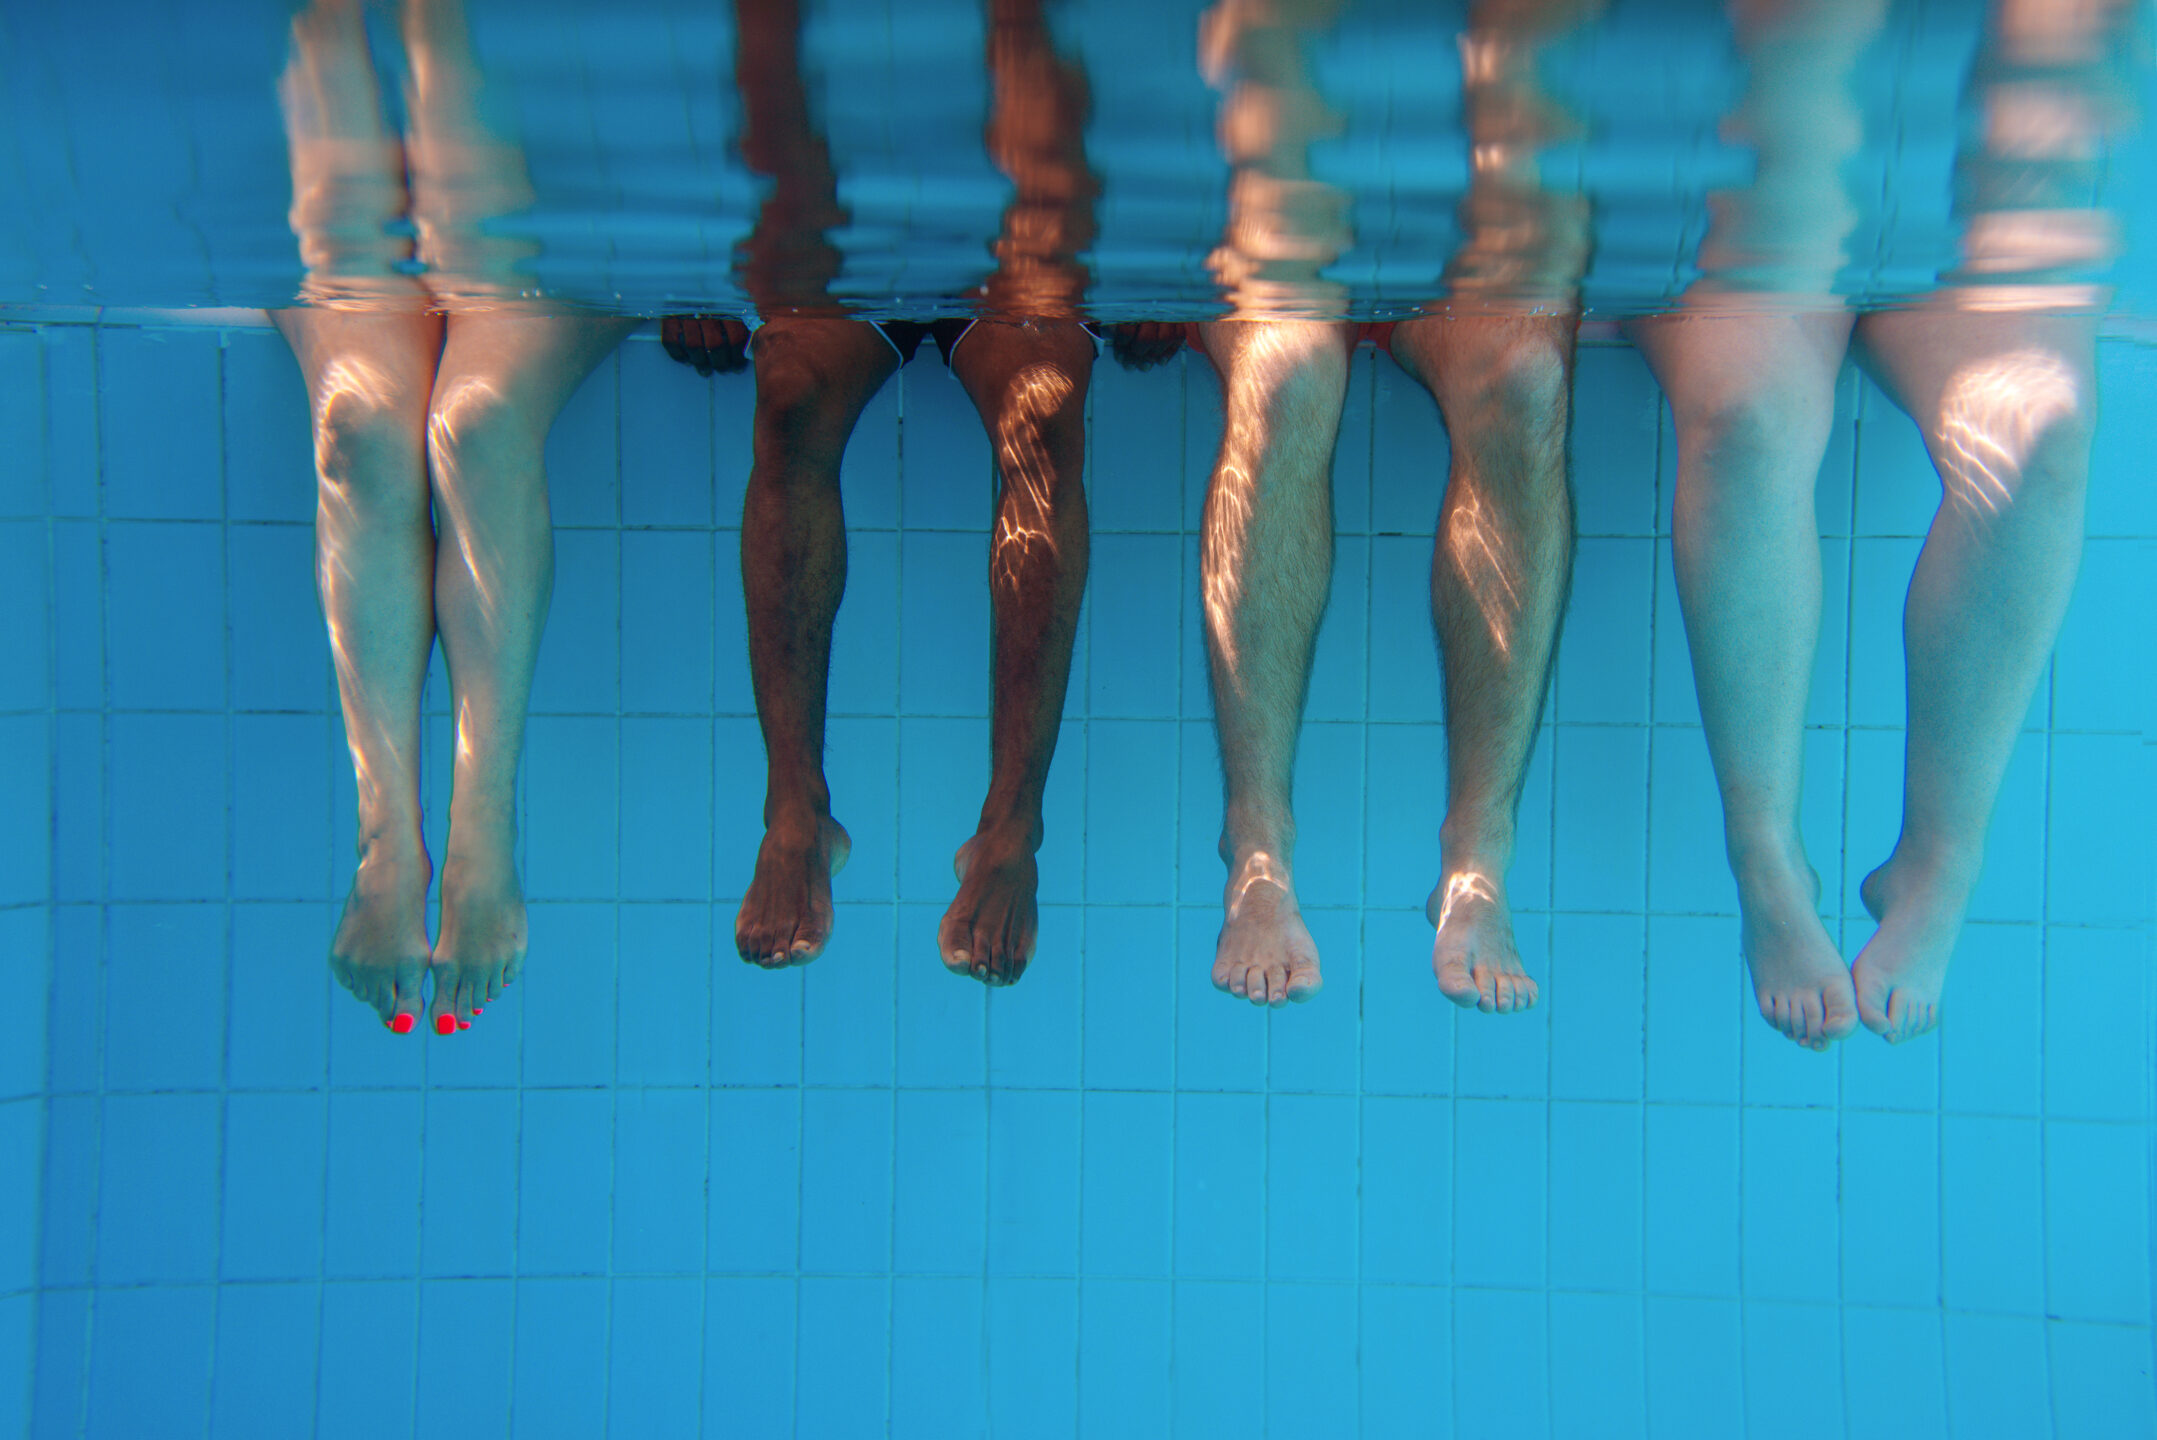 Featured image for “Planschabenteuer im Schwimmbad”